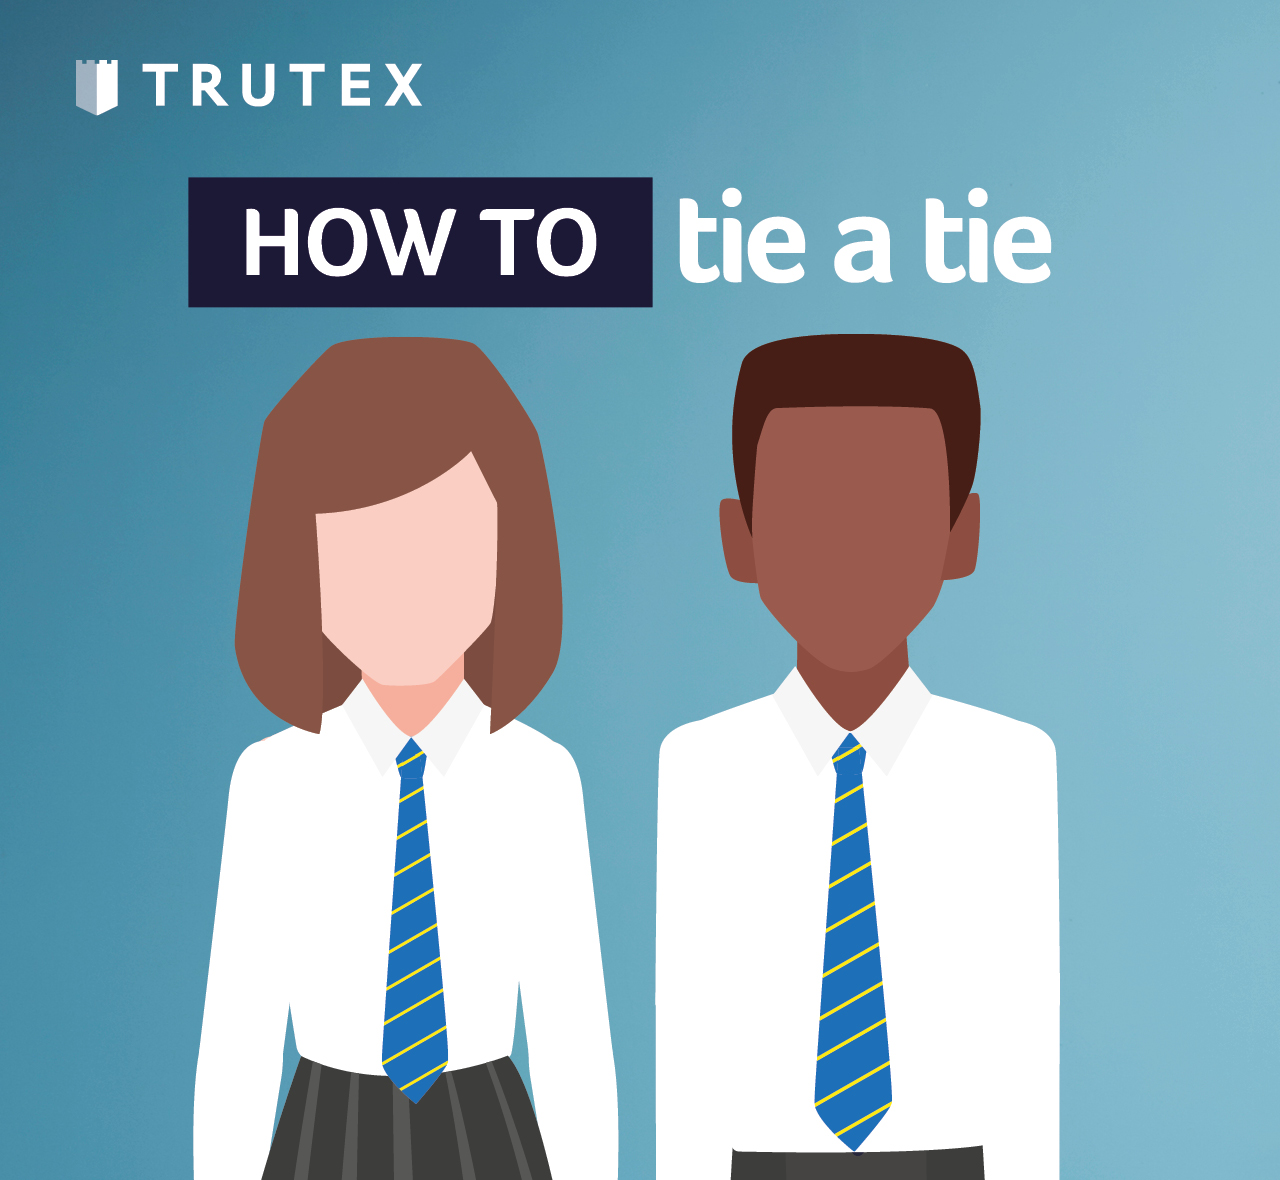 How to: tie a tie